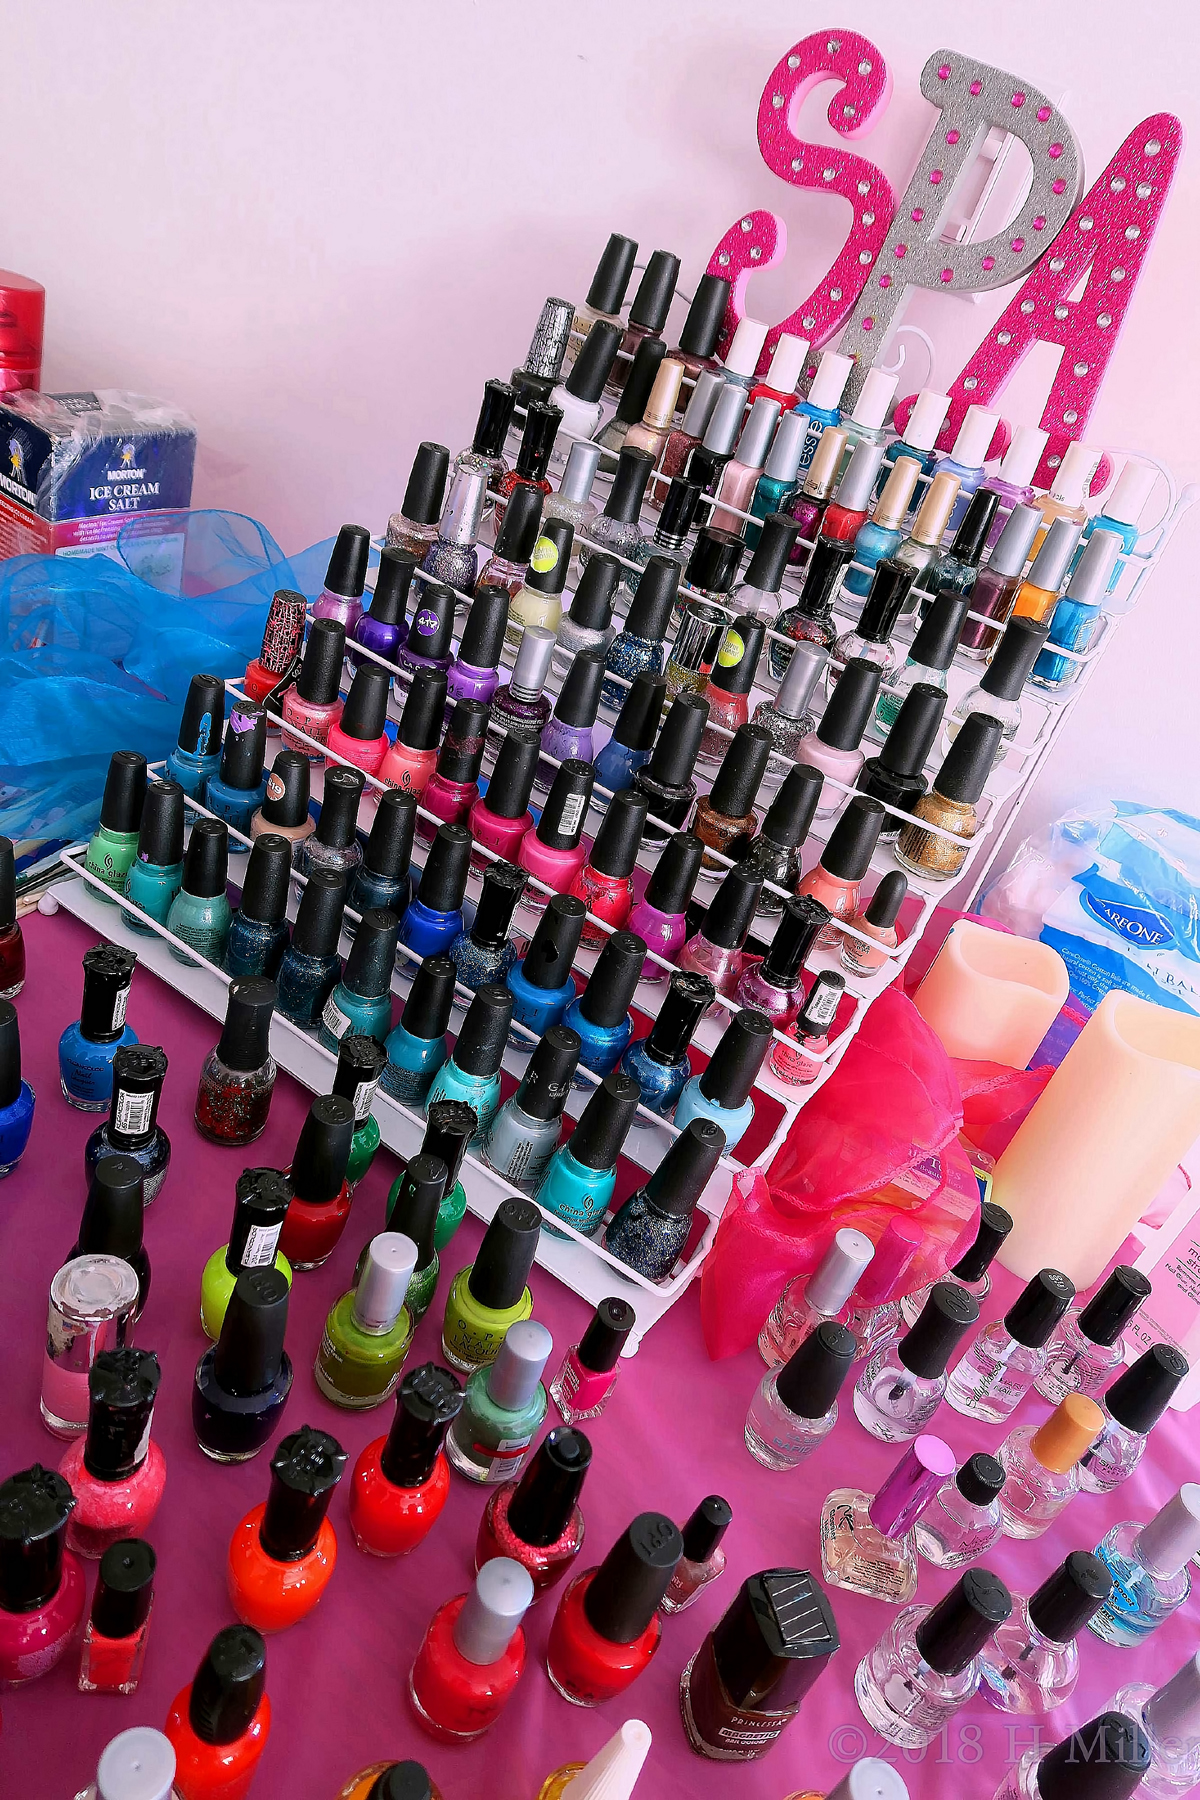 The Kids Nail Salon Is Set For Girls Nail Art And Manicures! 